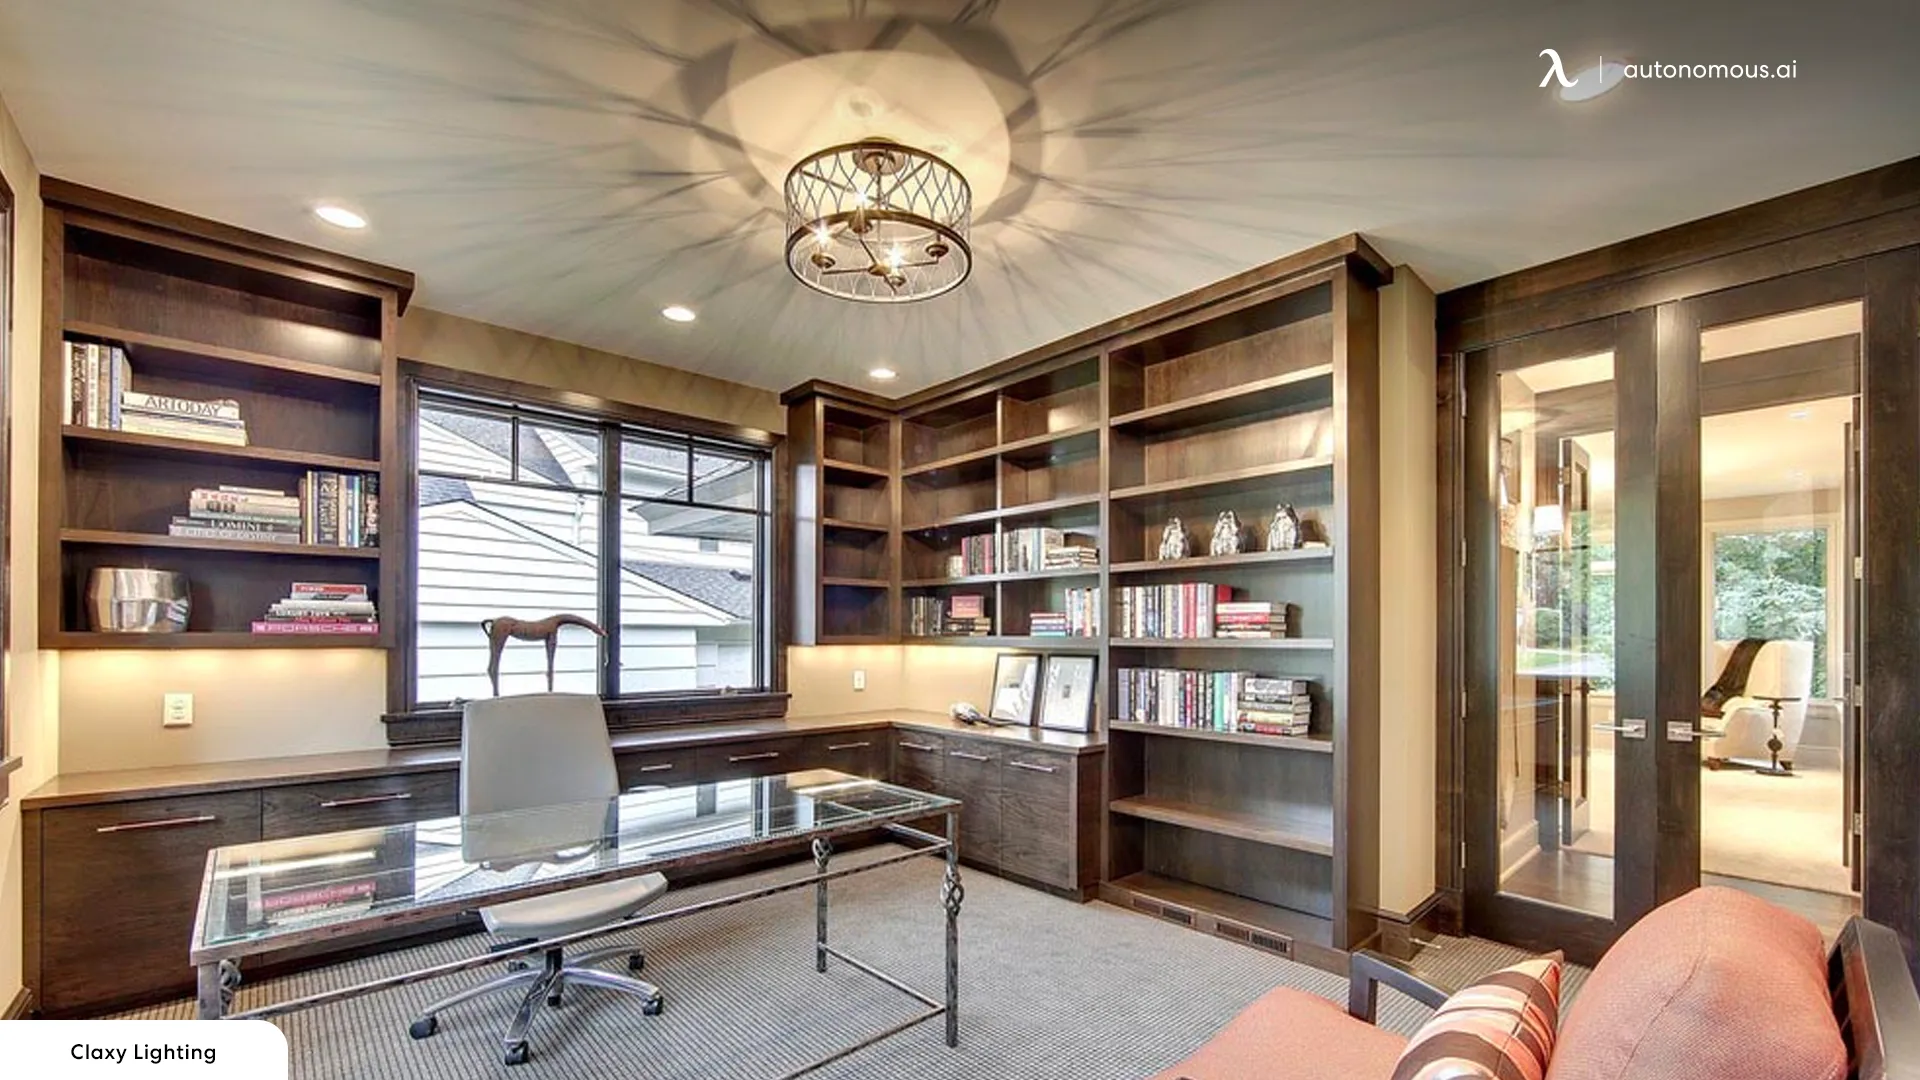 Optimize lighting and acoustics - classic home office design